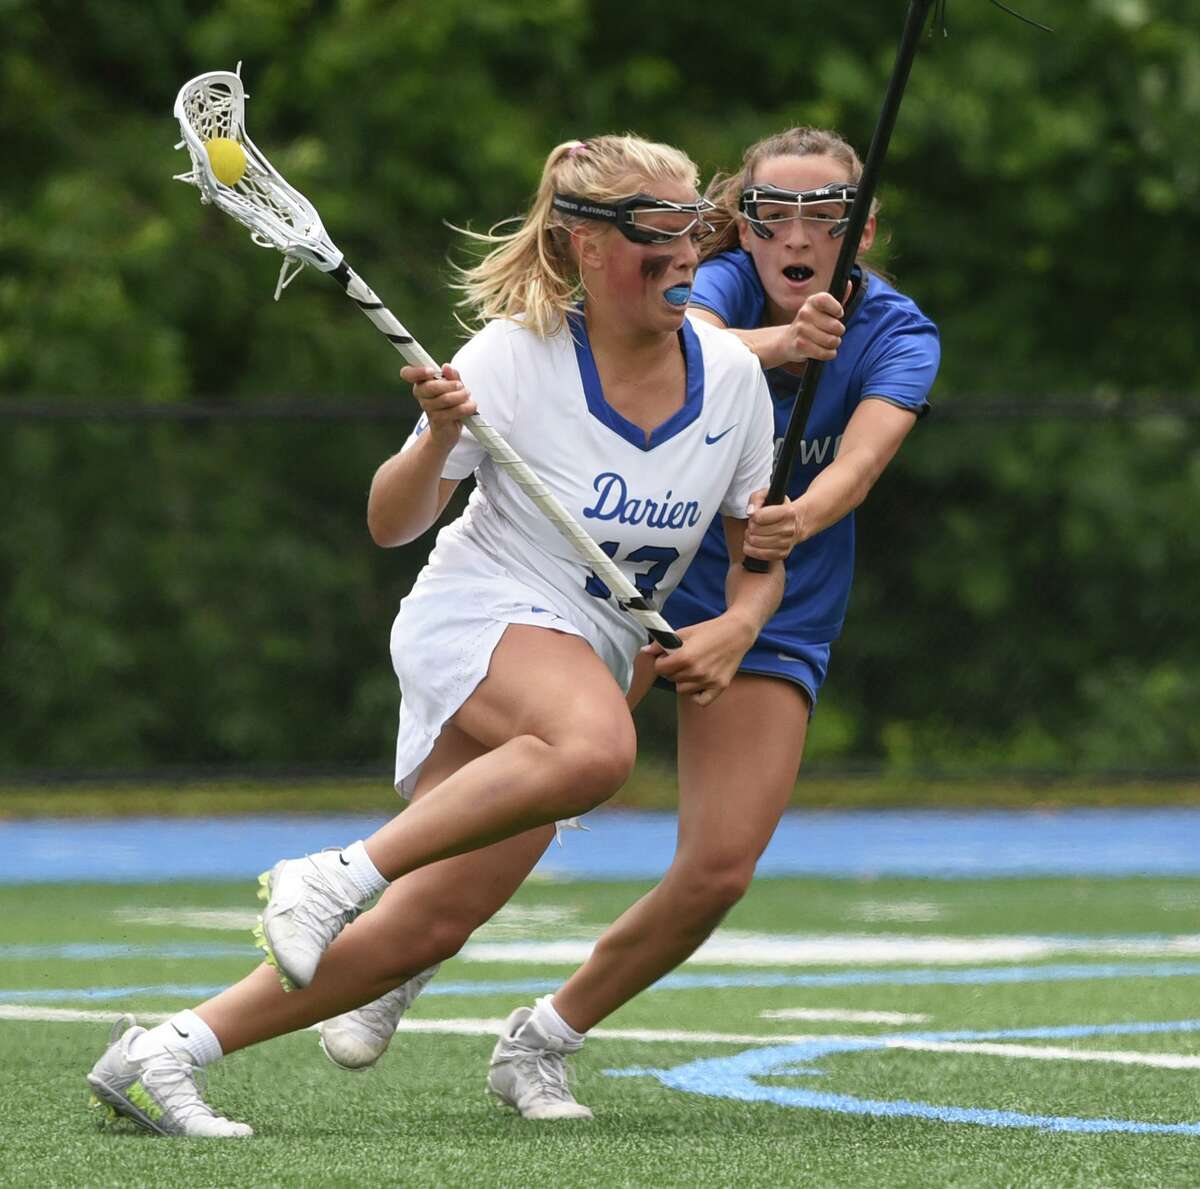 Darien's Molly McGuckin, wearing No. 13 as a junior, looks for a shot while Ludlowe's Claire Davenport (10) defends during the 2021 CIAC Class L girls lacrosse final.